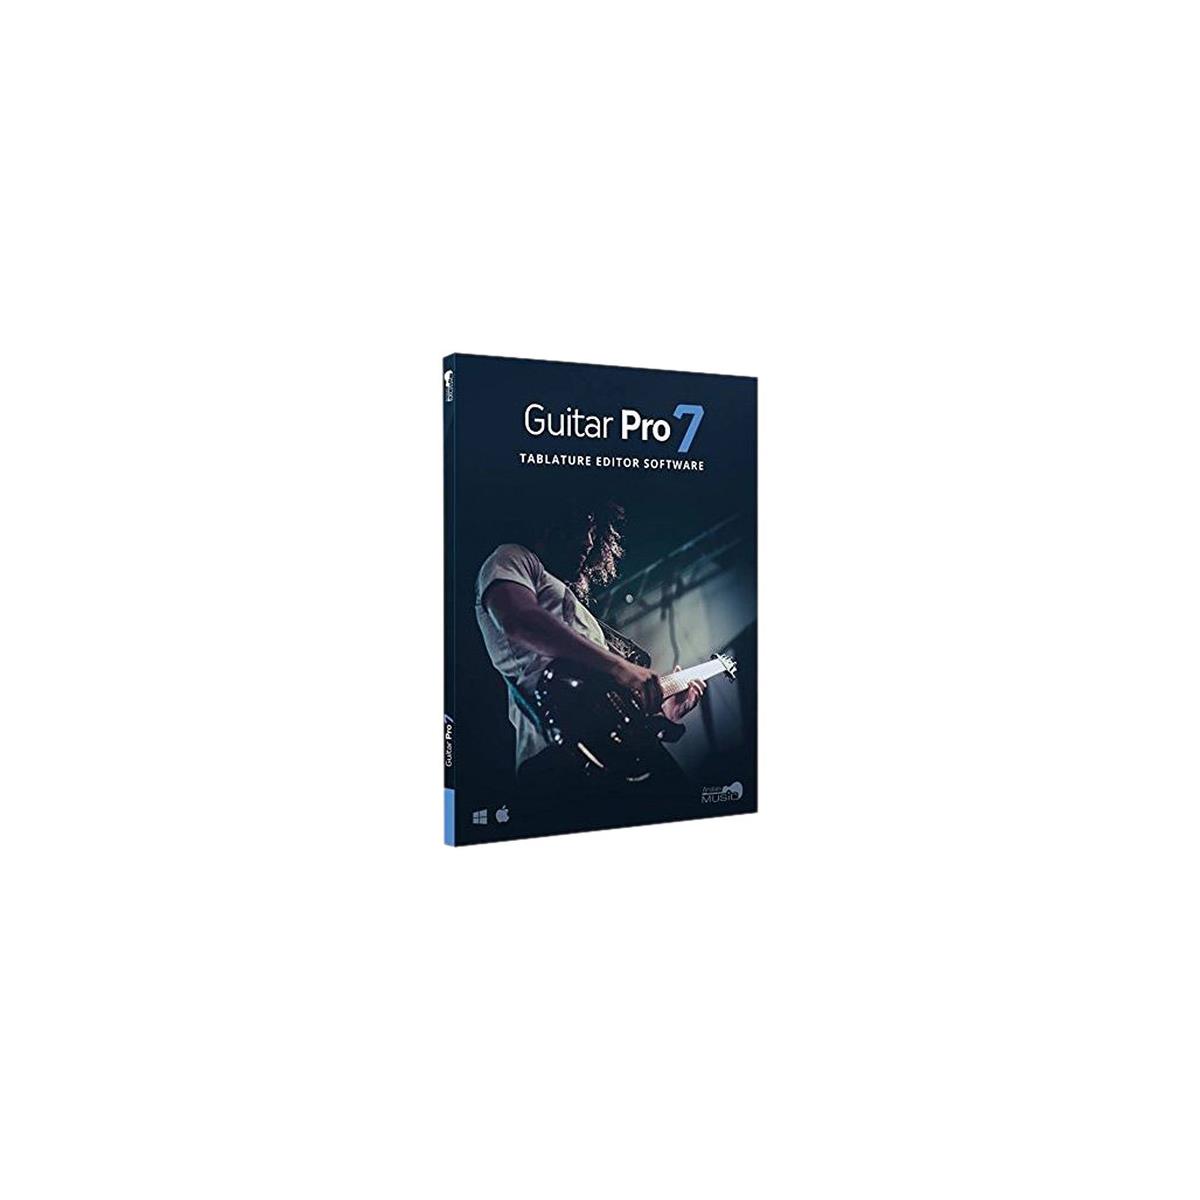 Image of Guitar Pro 7 - Tablature Guitar Editing and Composition Software